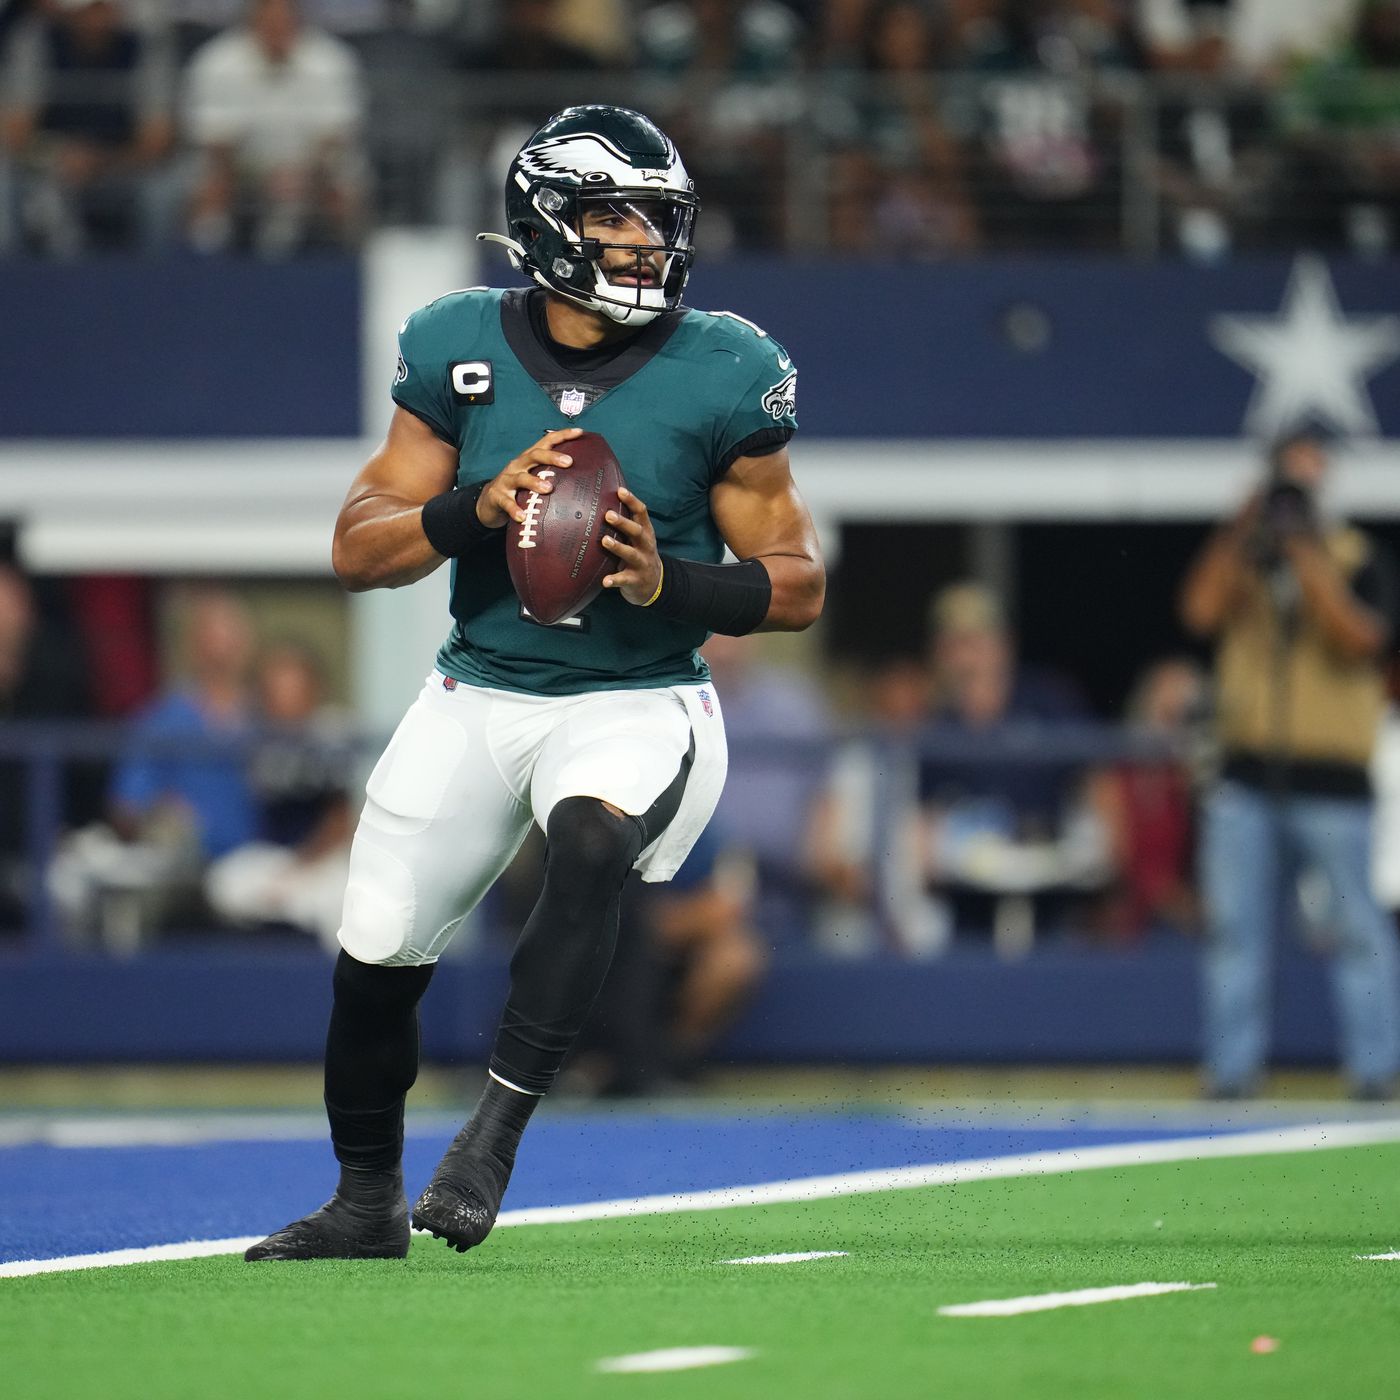 How to watch Cowboys vs. Eagles on Sunday Night Football